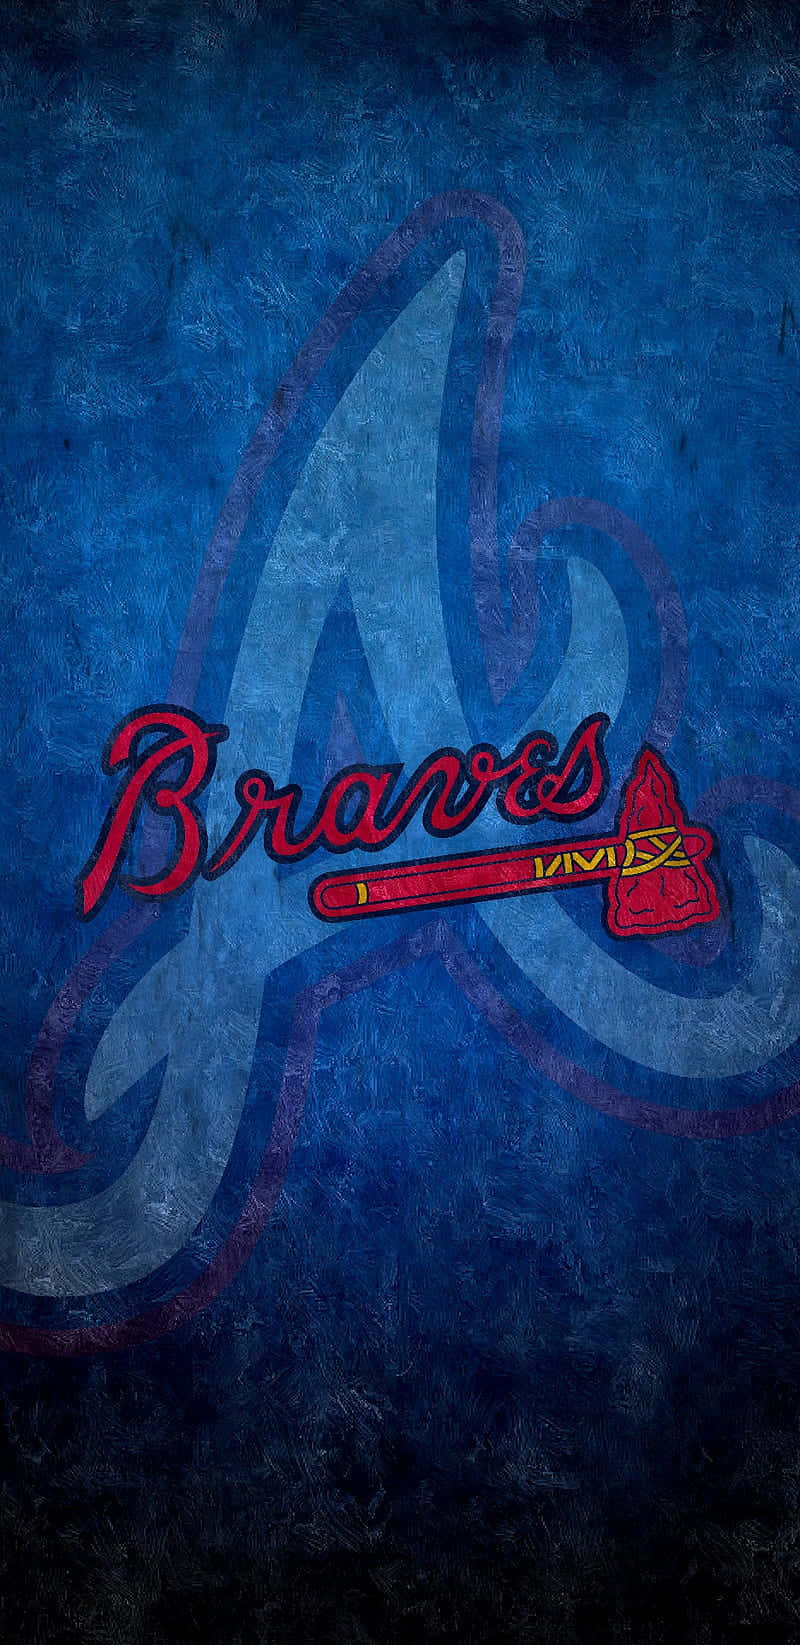 Get the official Atlanta Braves fan experience on your iPhone Wallpaper